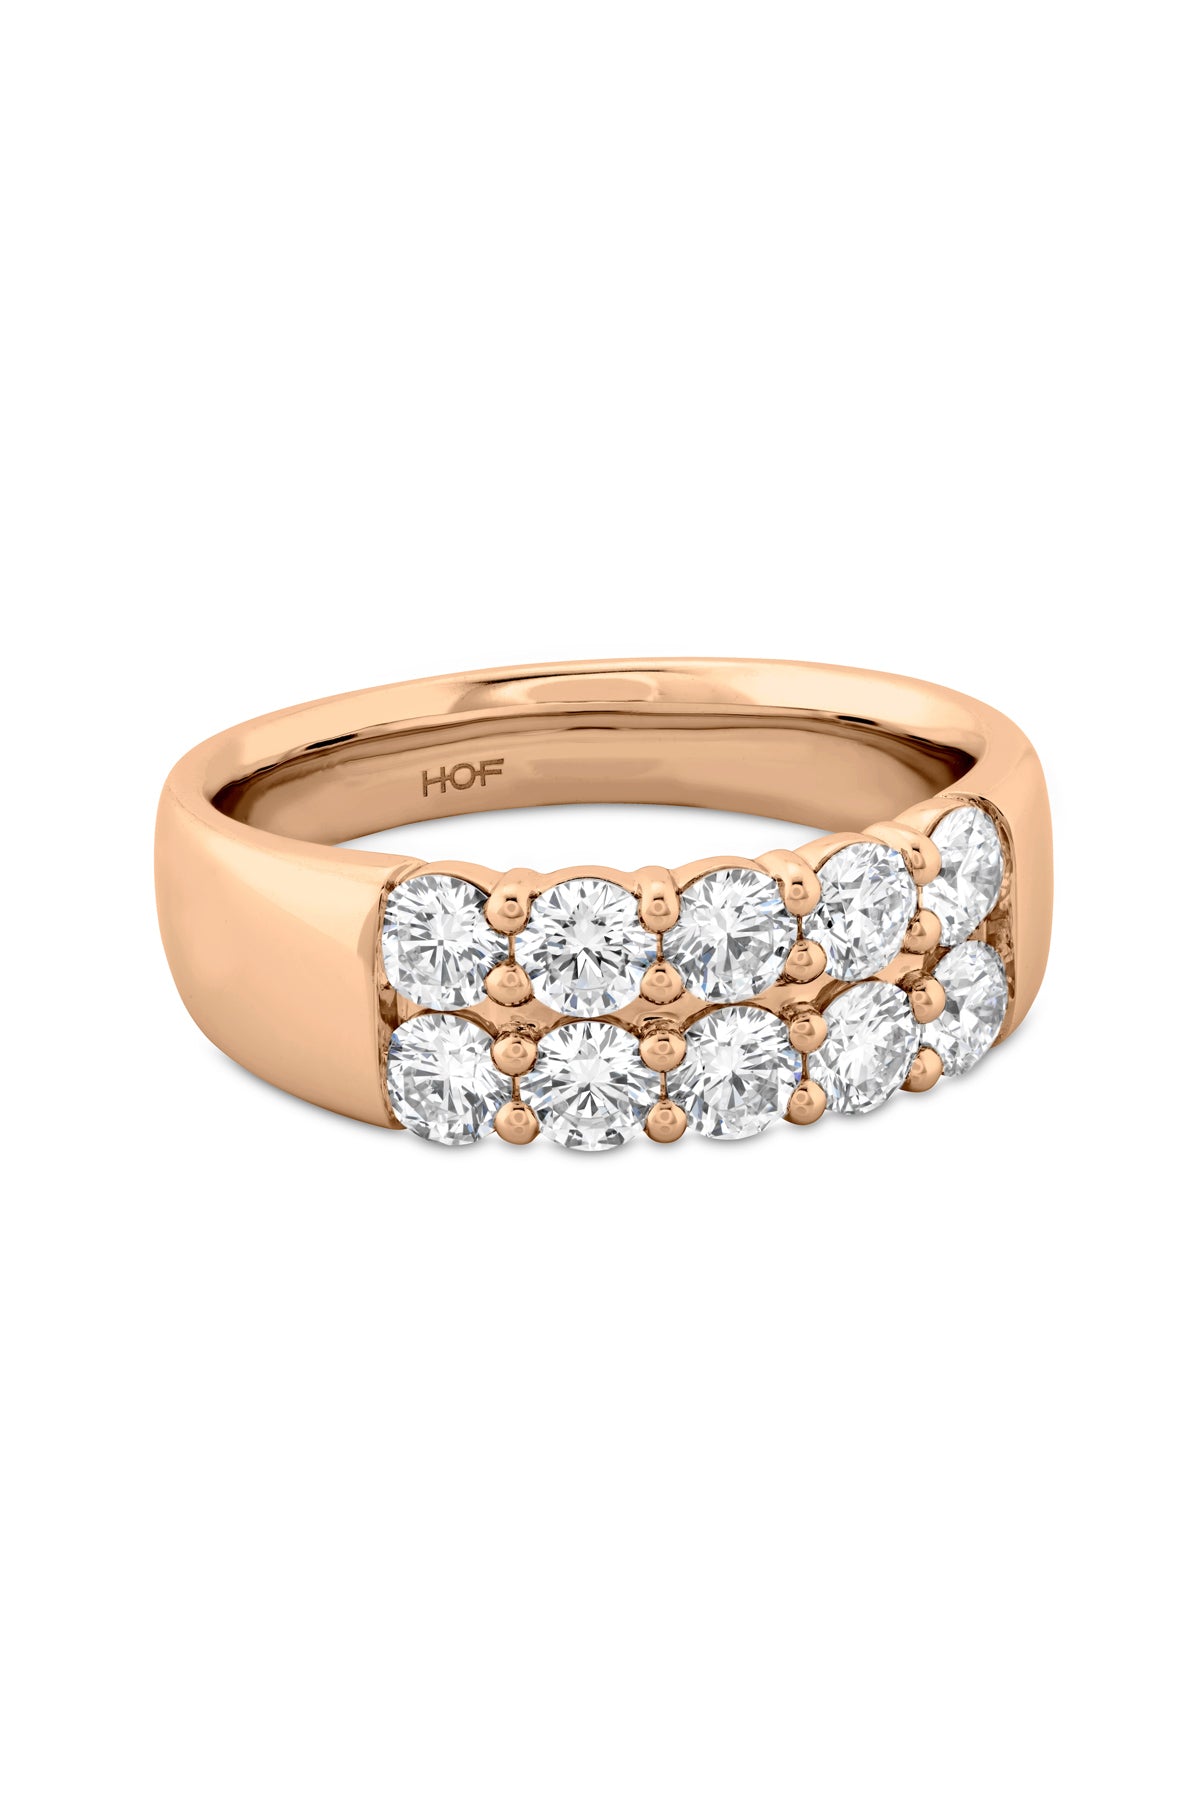 Signature Double Row Ring From Hearts On Fire available at LeGassick Diamonds and Jewellery Gold Coast, Australia.